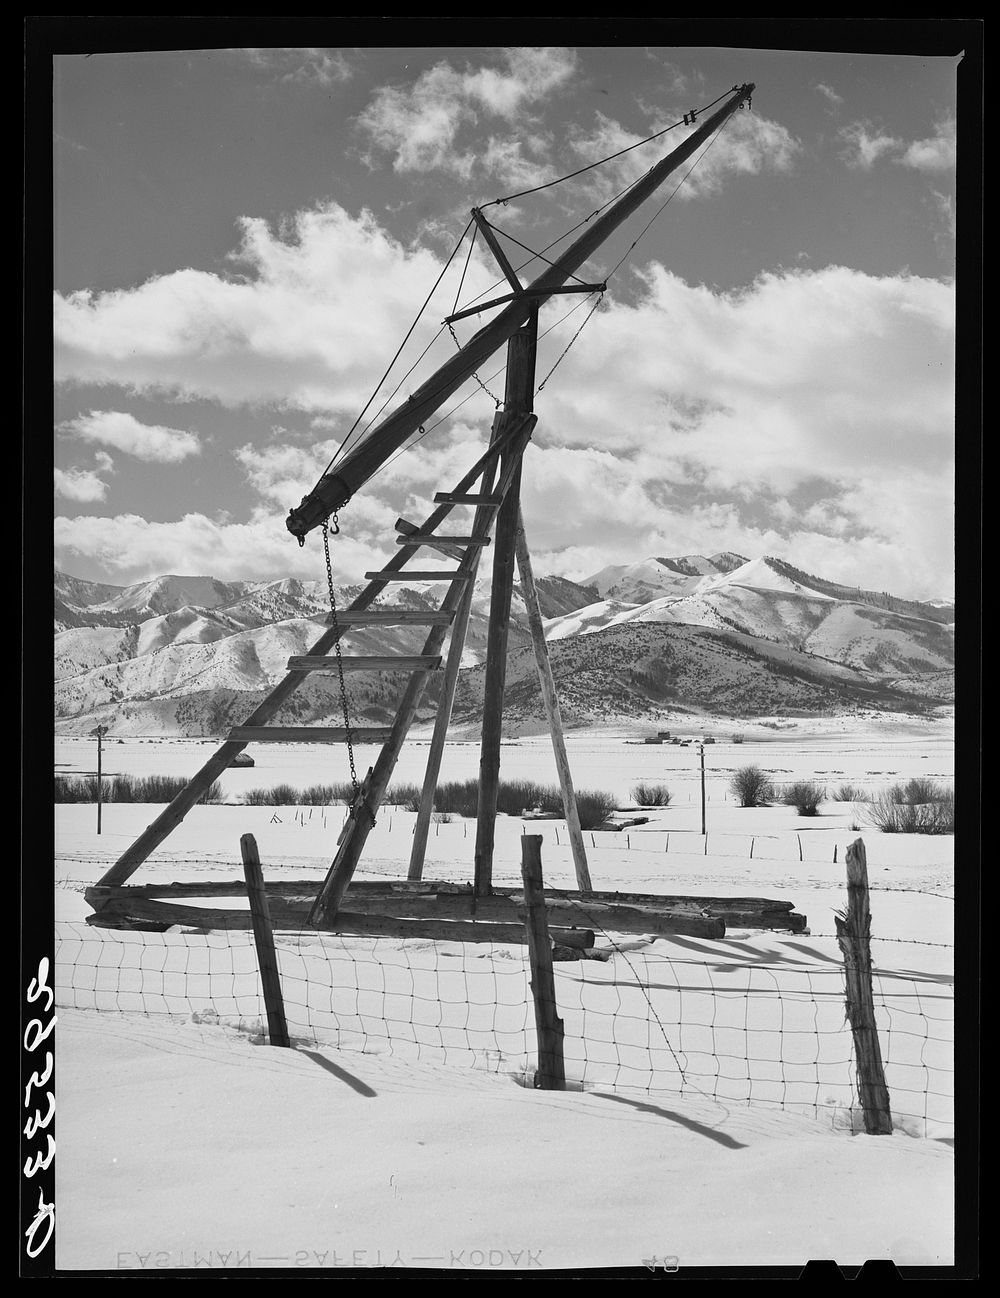 [Untitled photo, possibly related to: Hay stacker. Summit County, Utah]. Sourced from the Library of Congress.